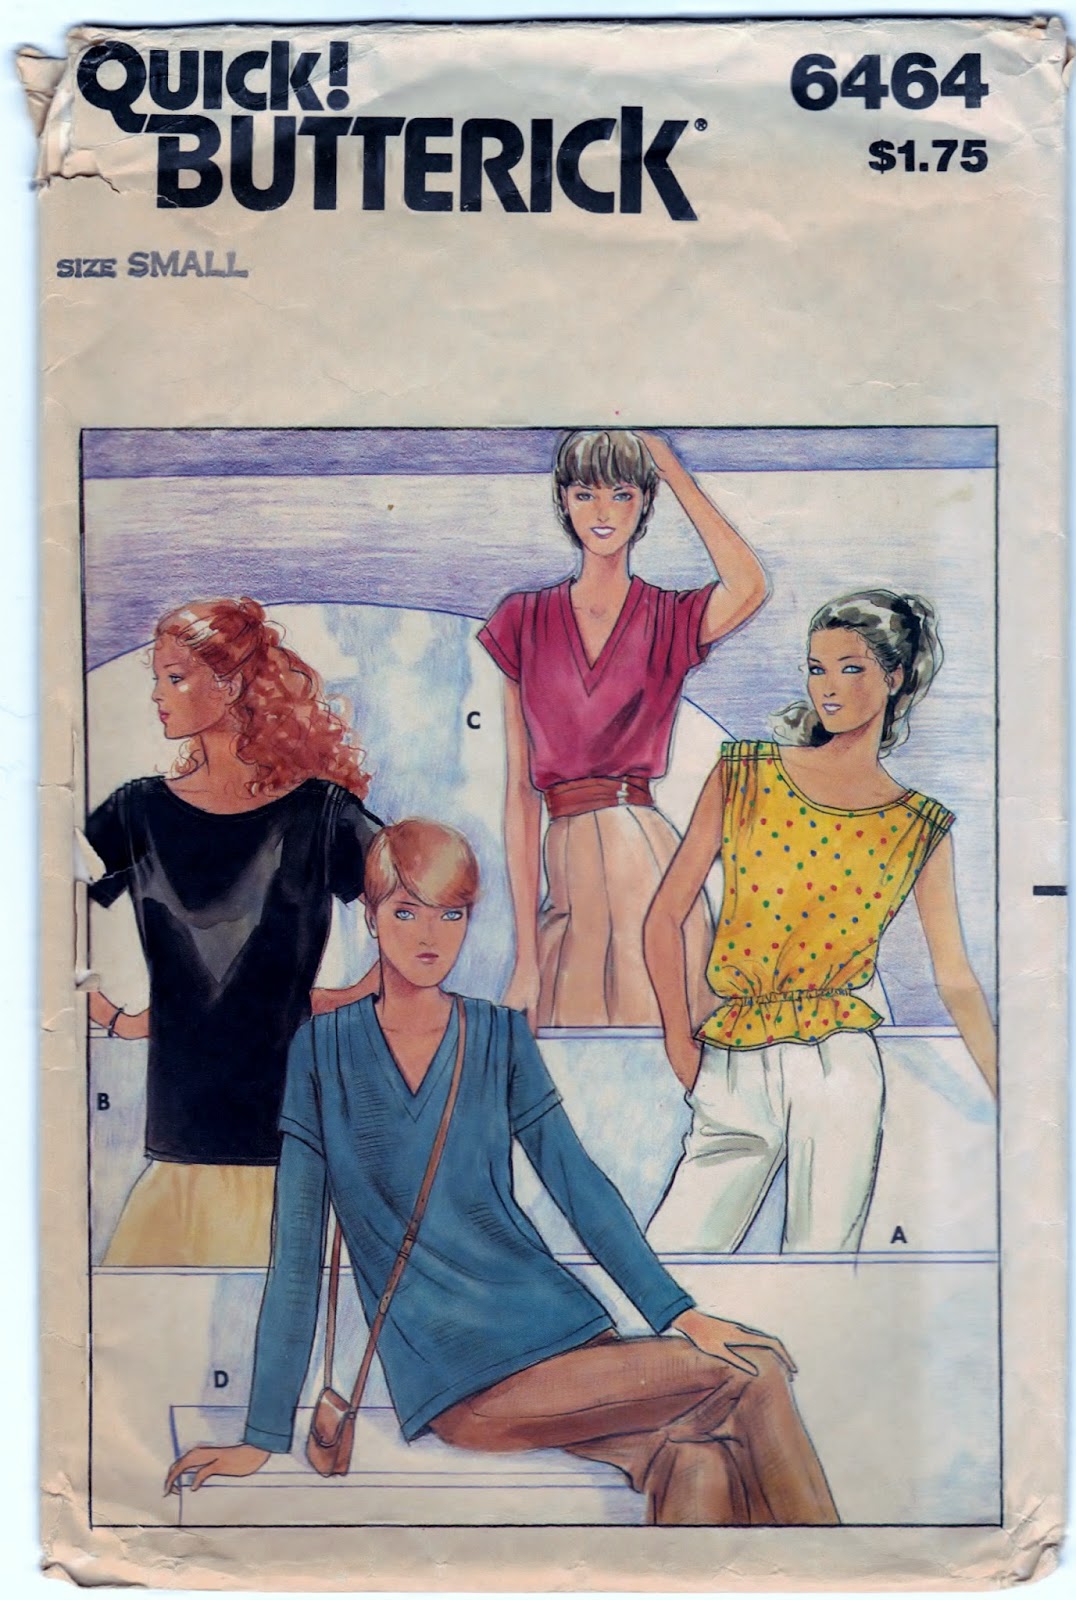 https://www.etsy.com/listing/219202584/butterick-6464-sewing-craft-pattern﻿